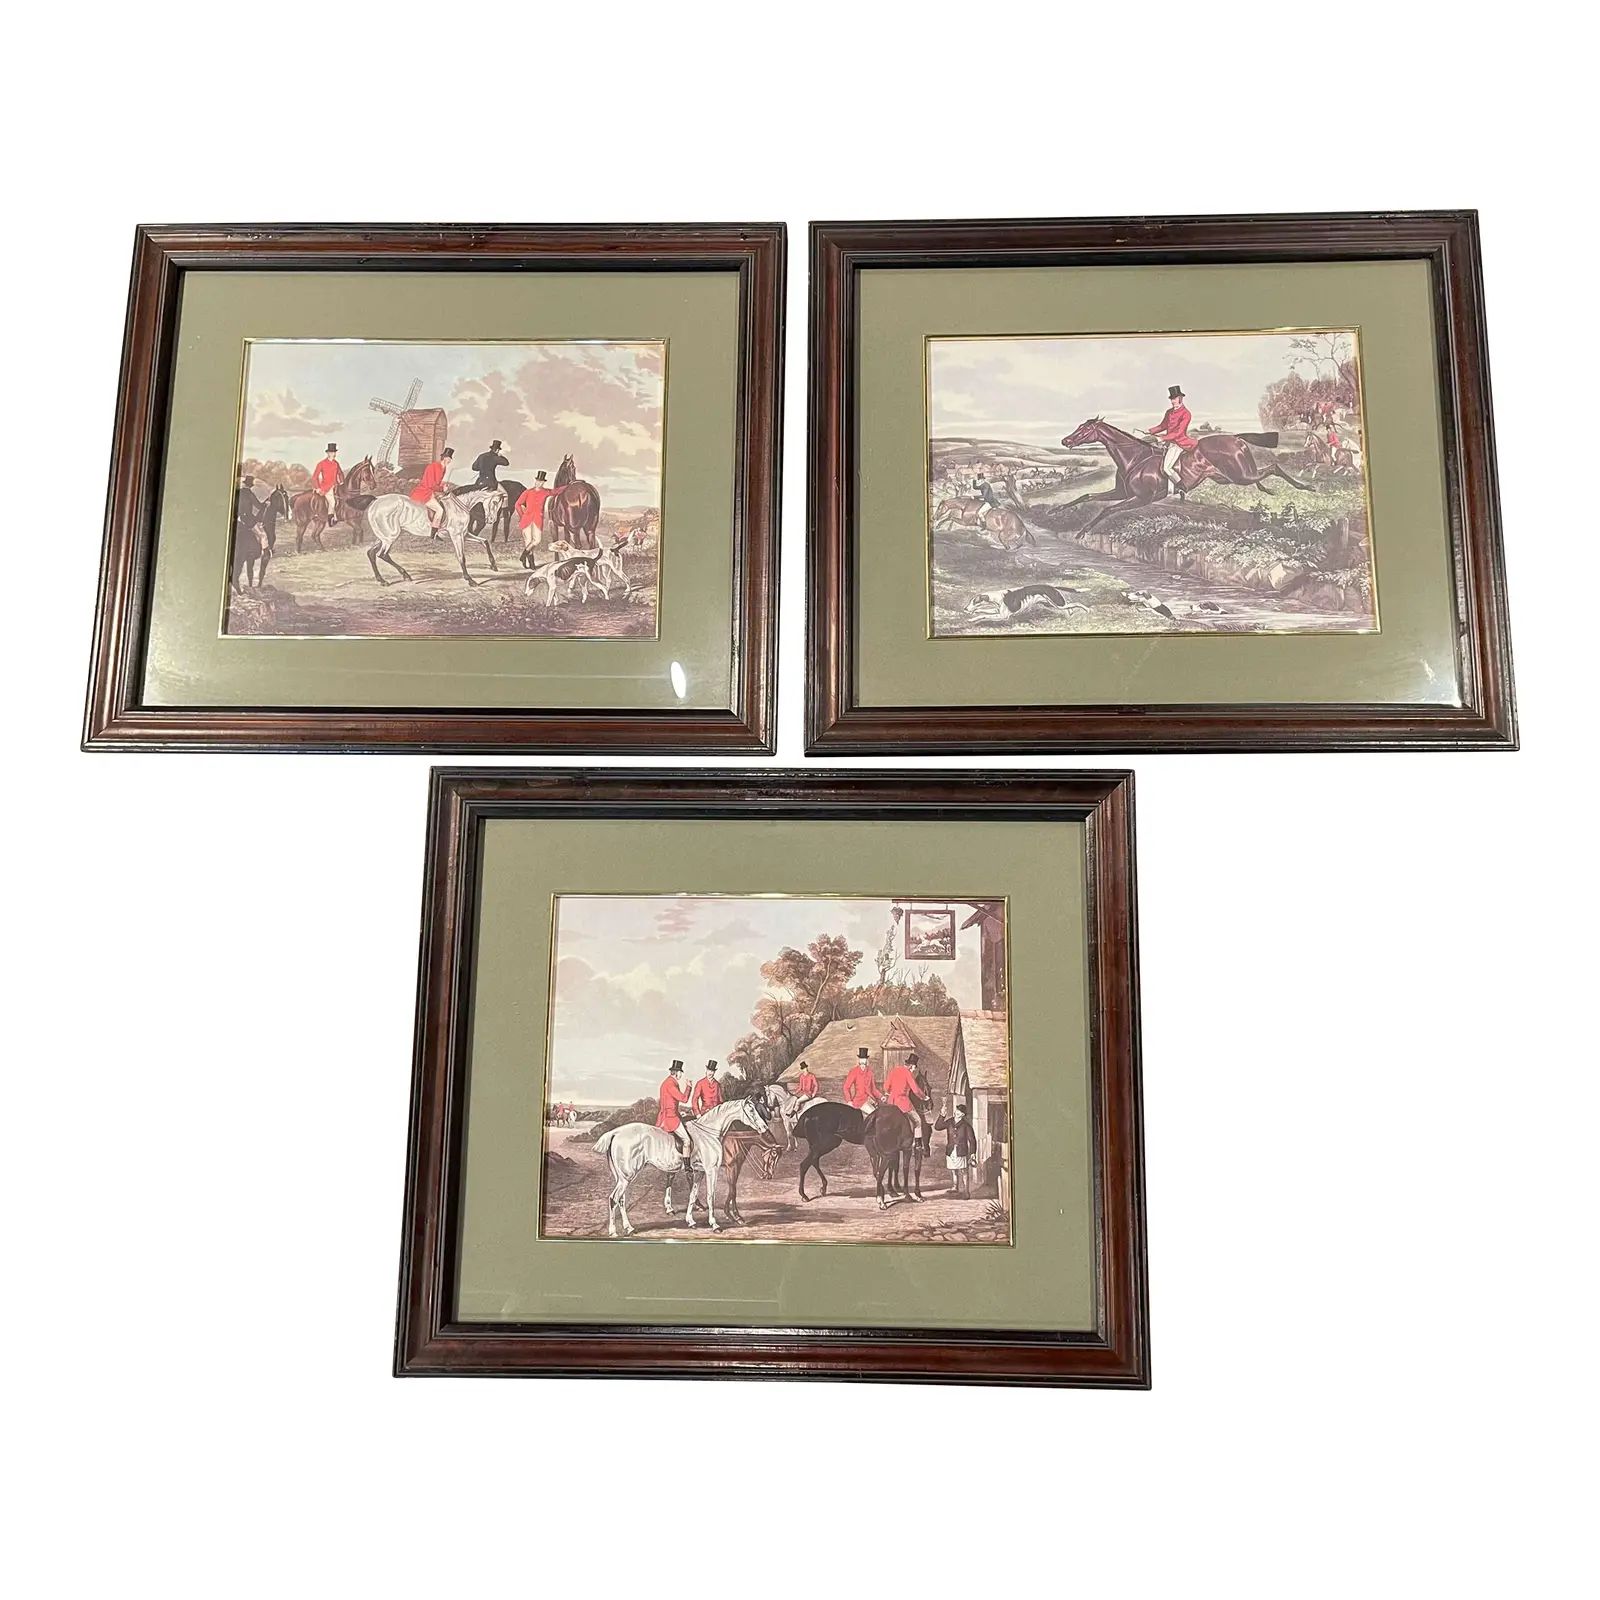 Early 20th Century French Framed Watercolor Hunt Scene Prints, Set of Three | Chairish